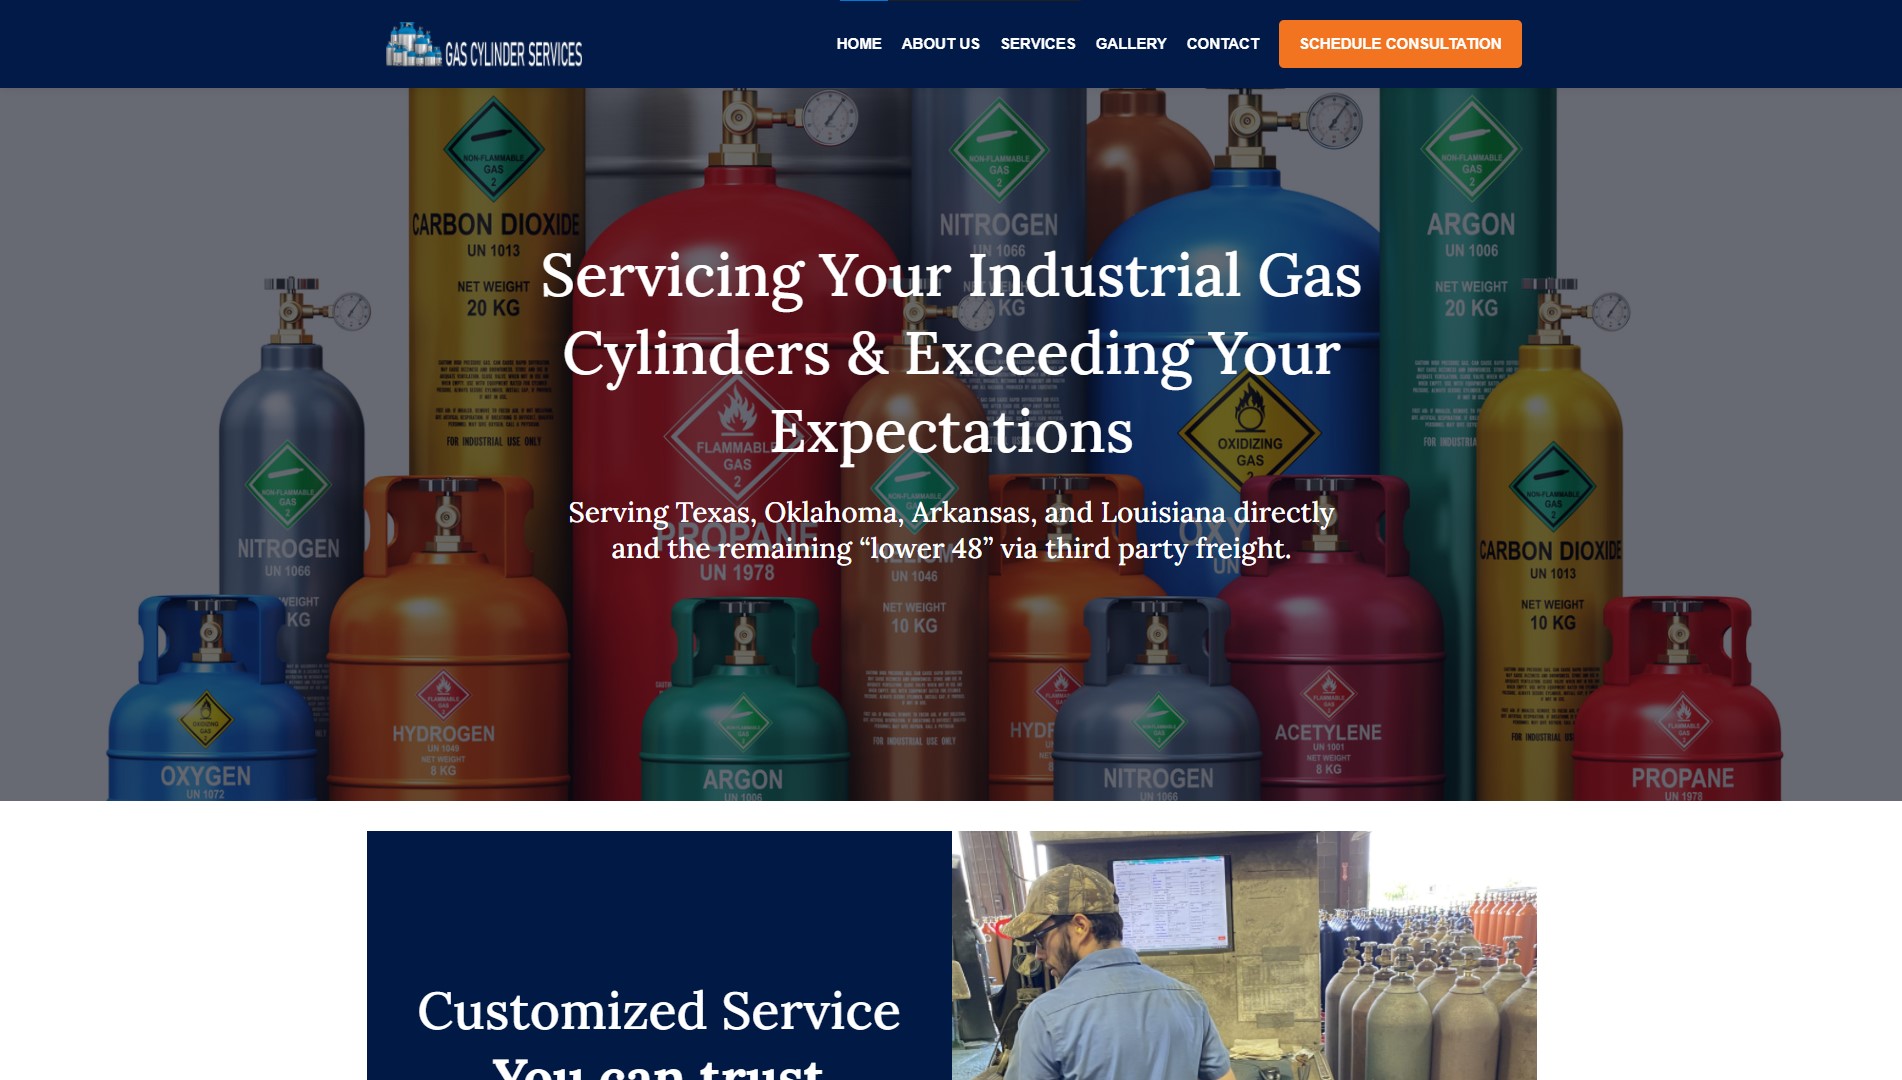 How Gas Cylinder Services Keeps Loyal Customers With Their Updated Brand